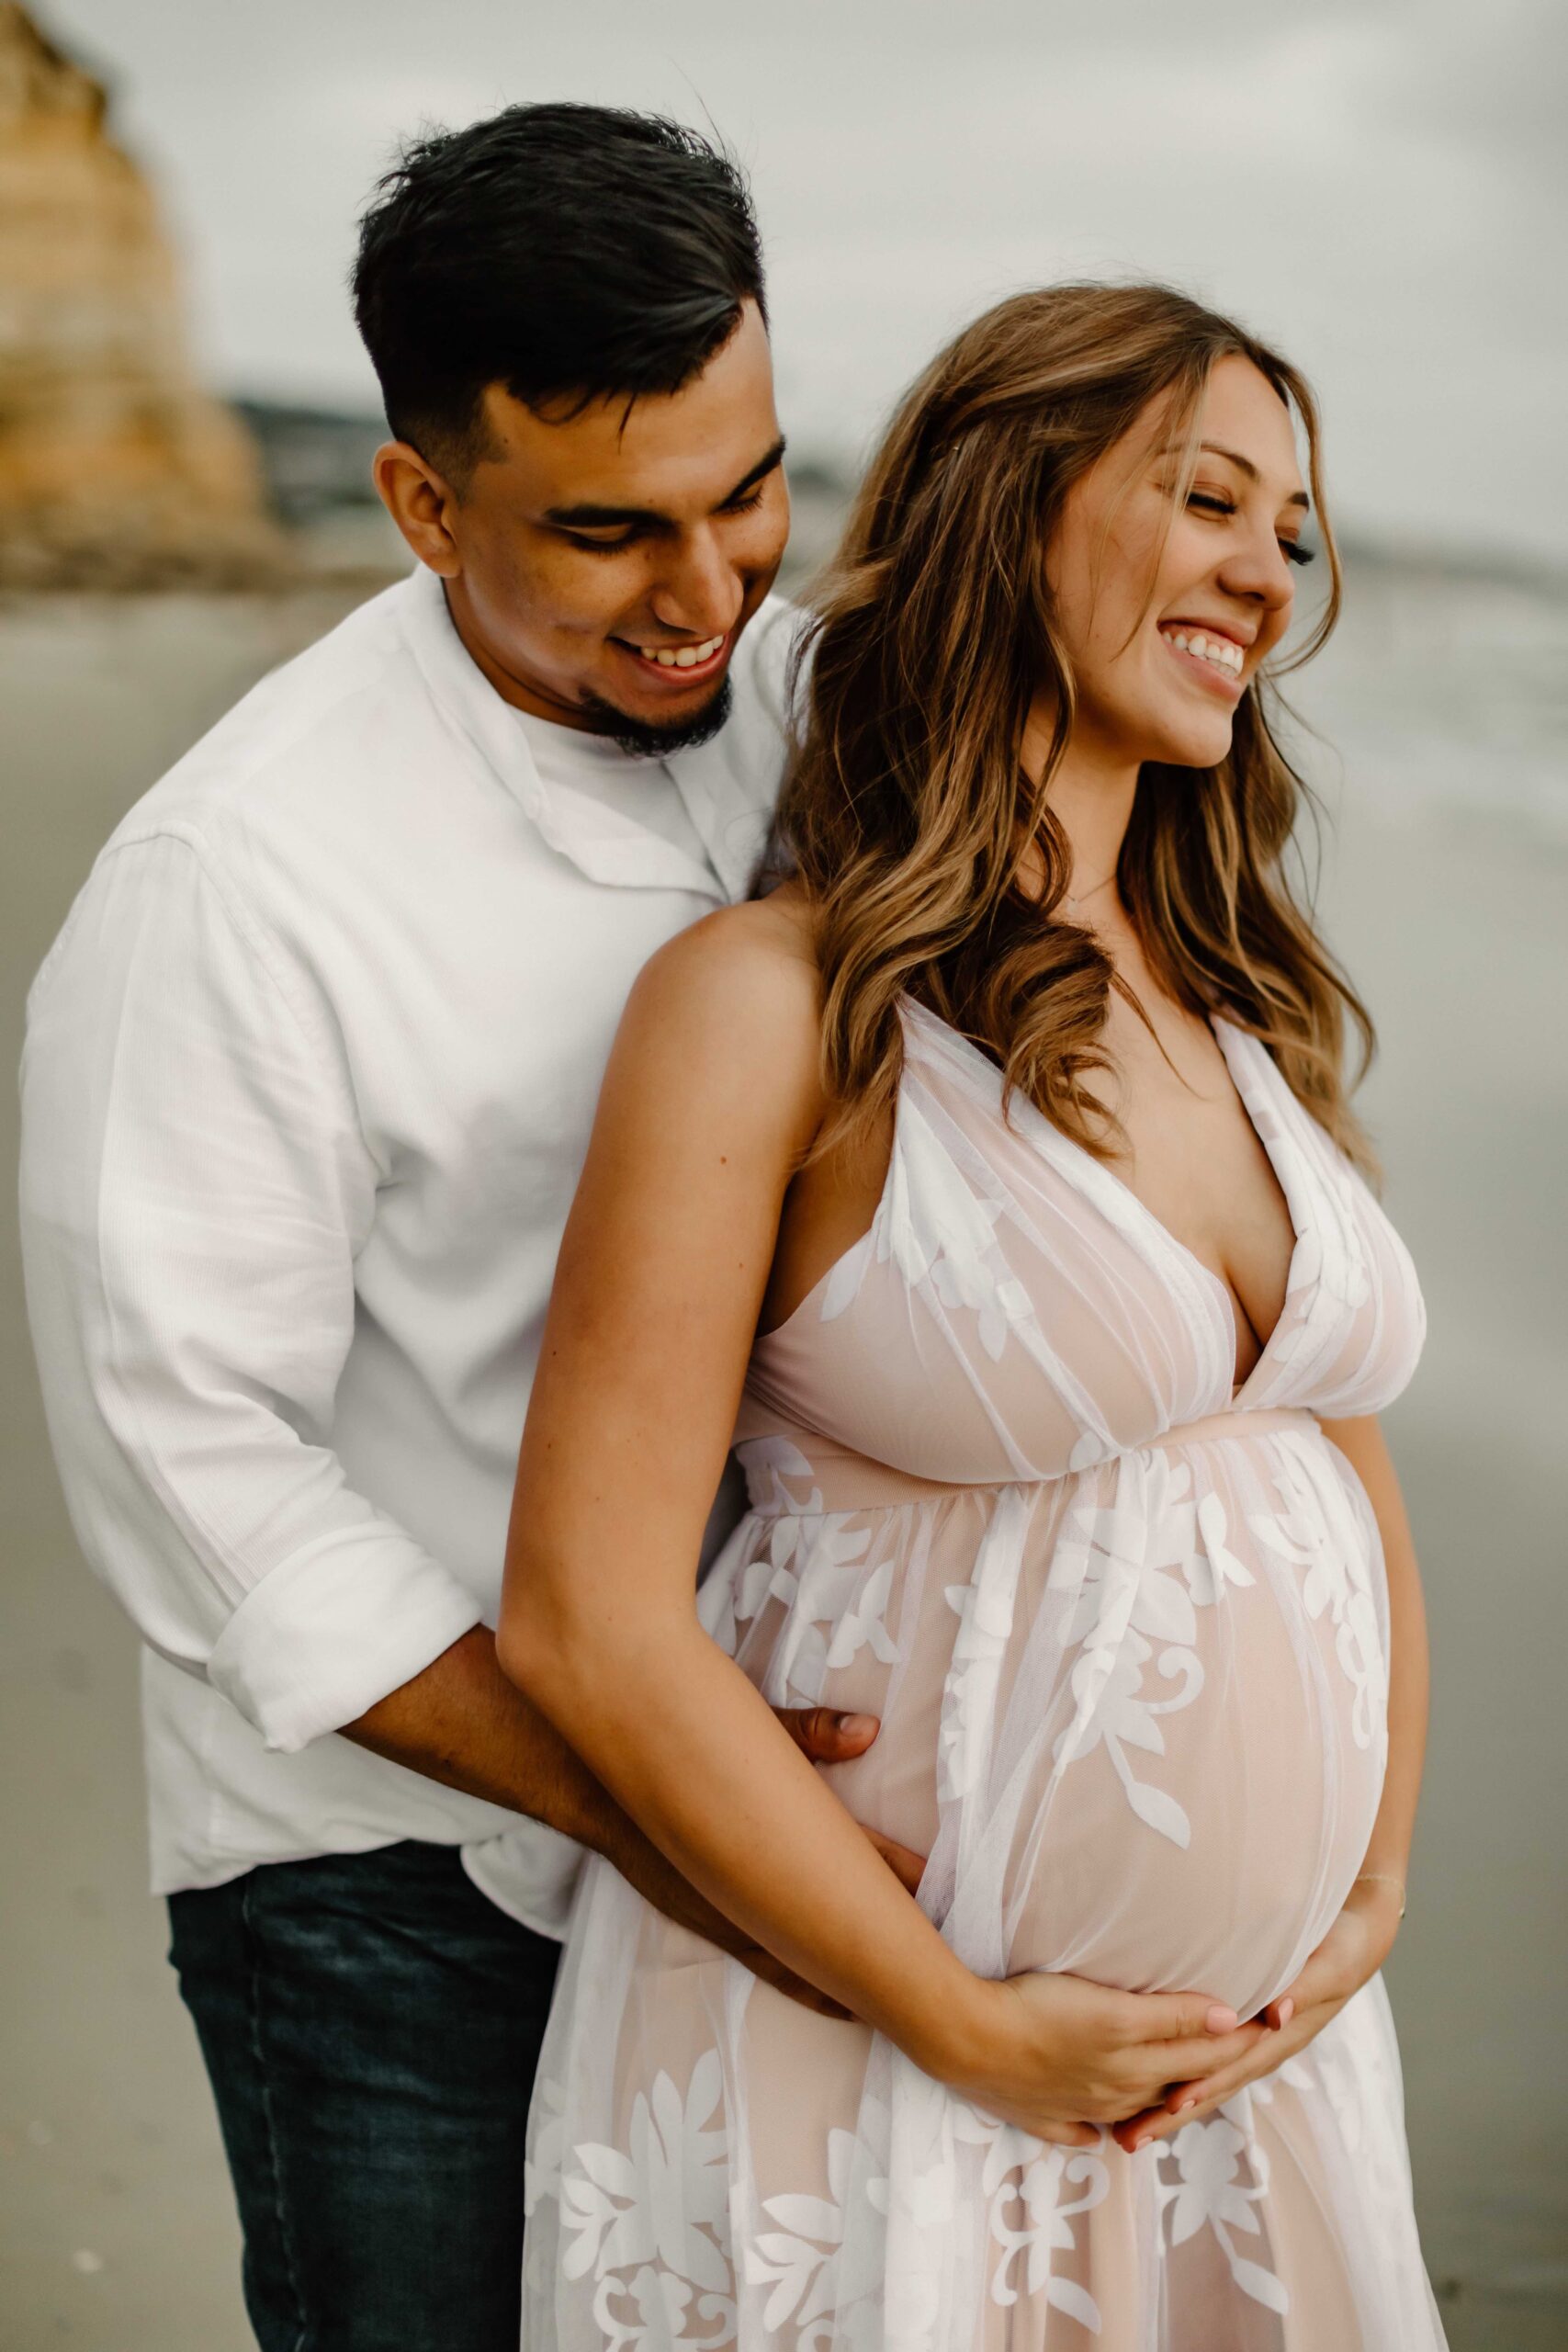 Pregnant woman and man cuddling on a beach in san diego suring their maternity photoshoot. 